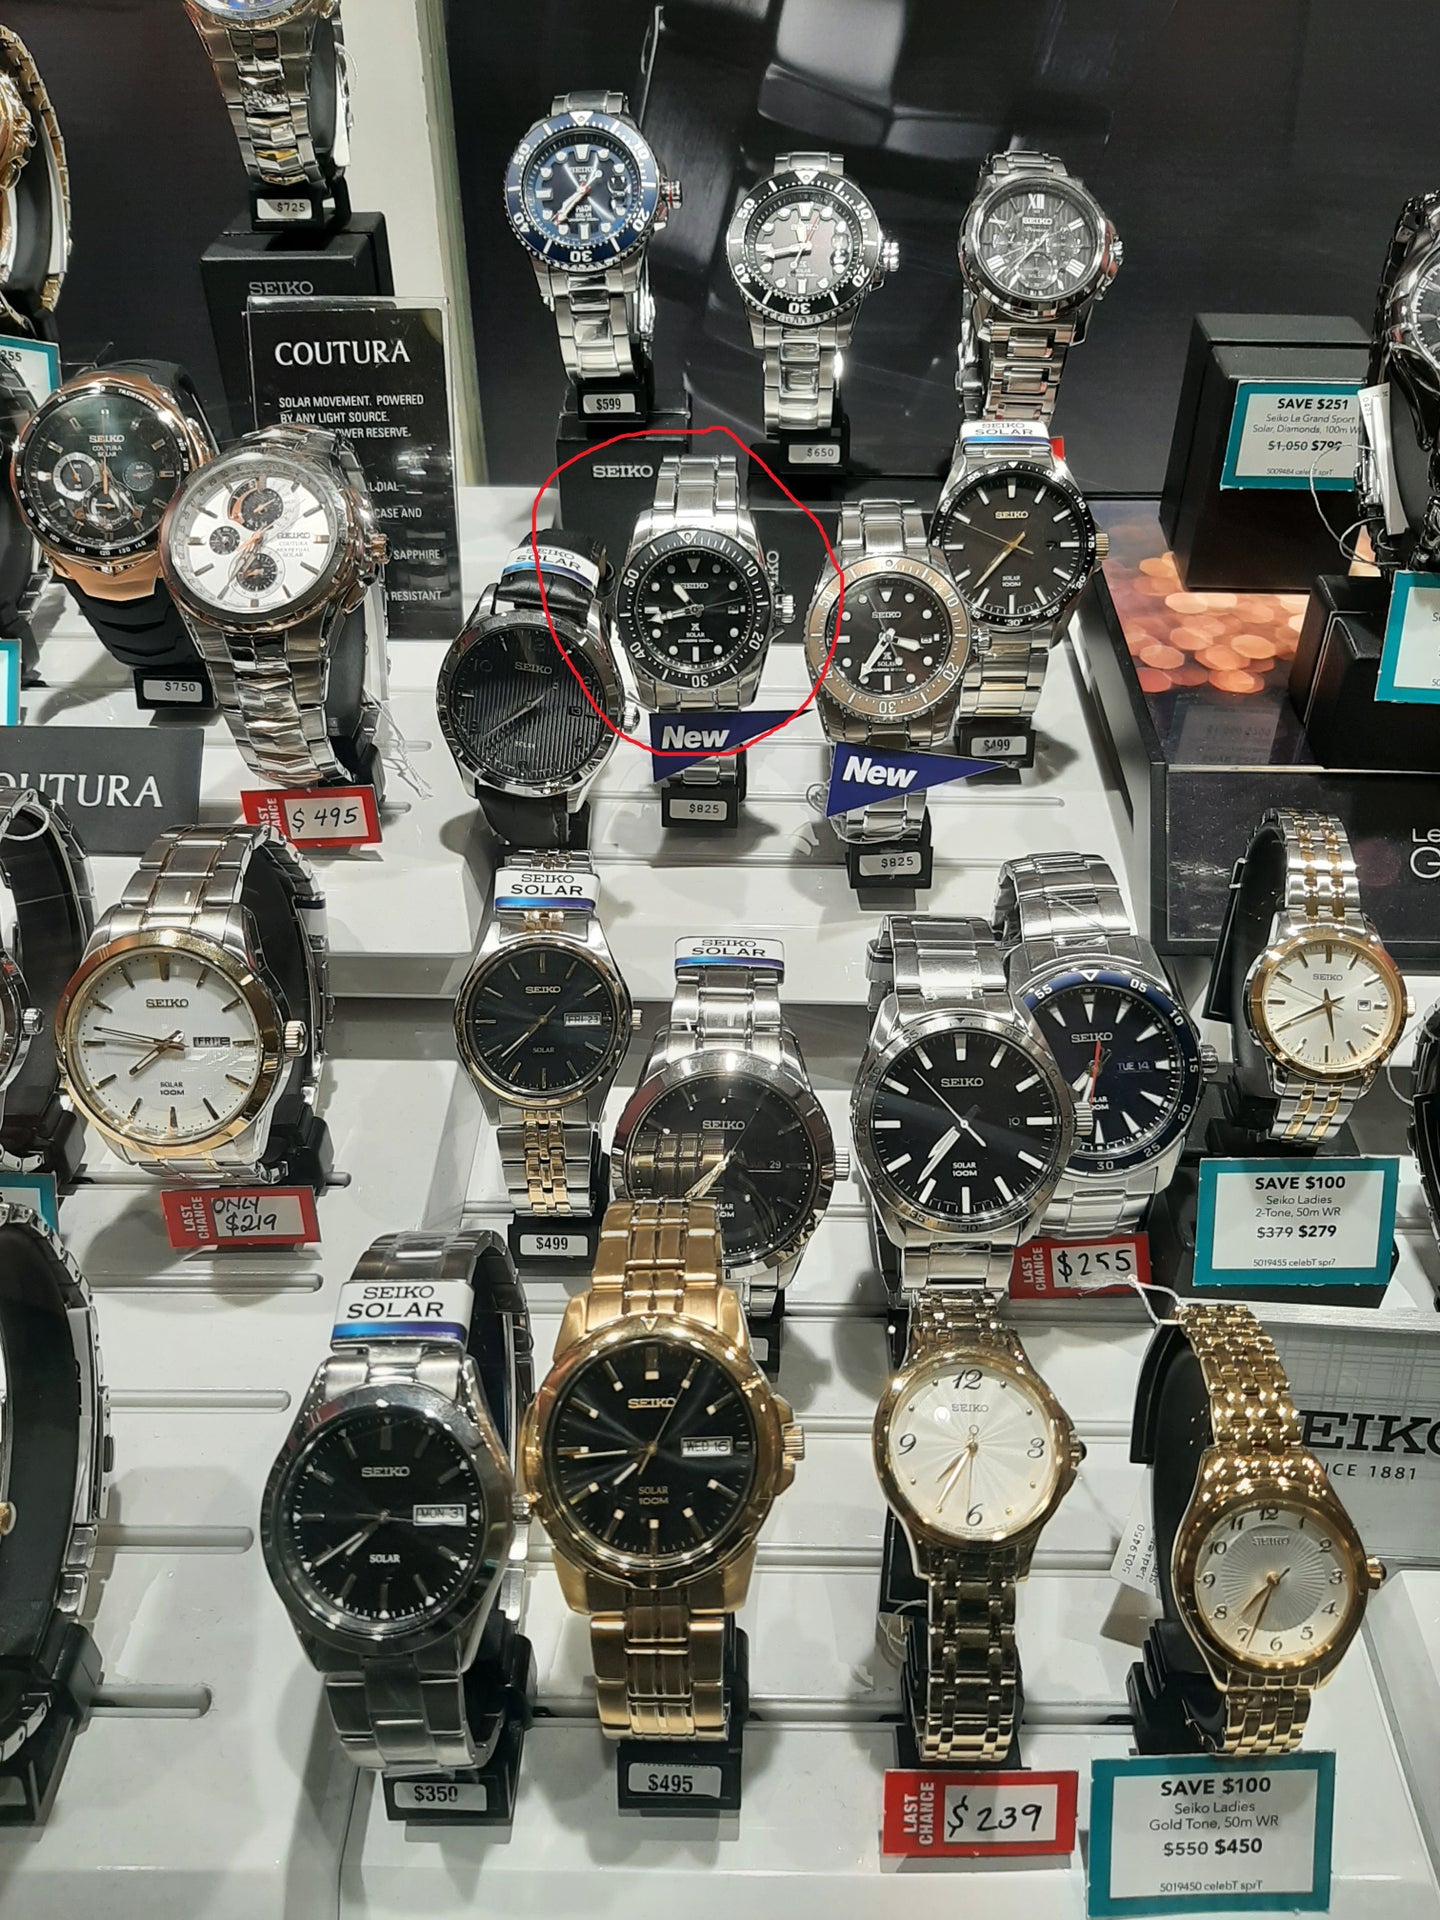 In this troubled age of Seiko, I've found the PERFECT Seiko watch (but  can't find its reference number!) | WatchUSeek Watch Forums